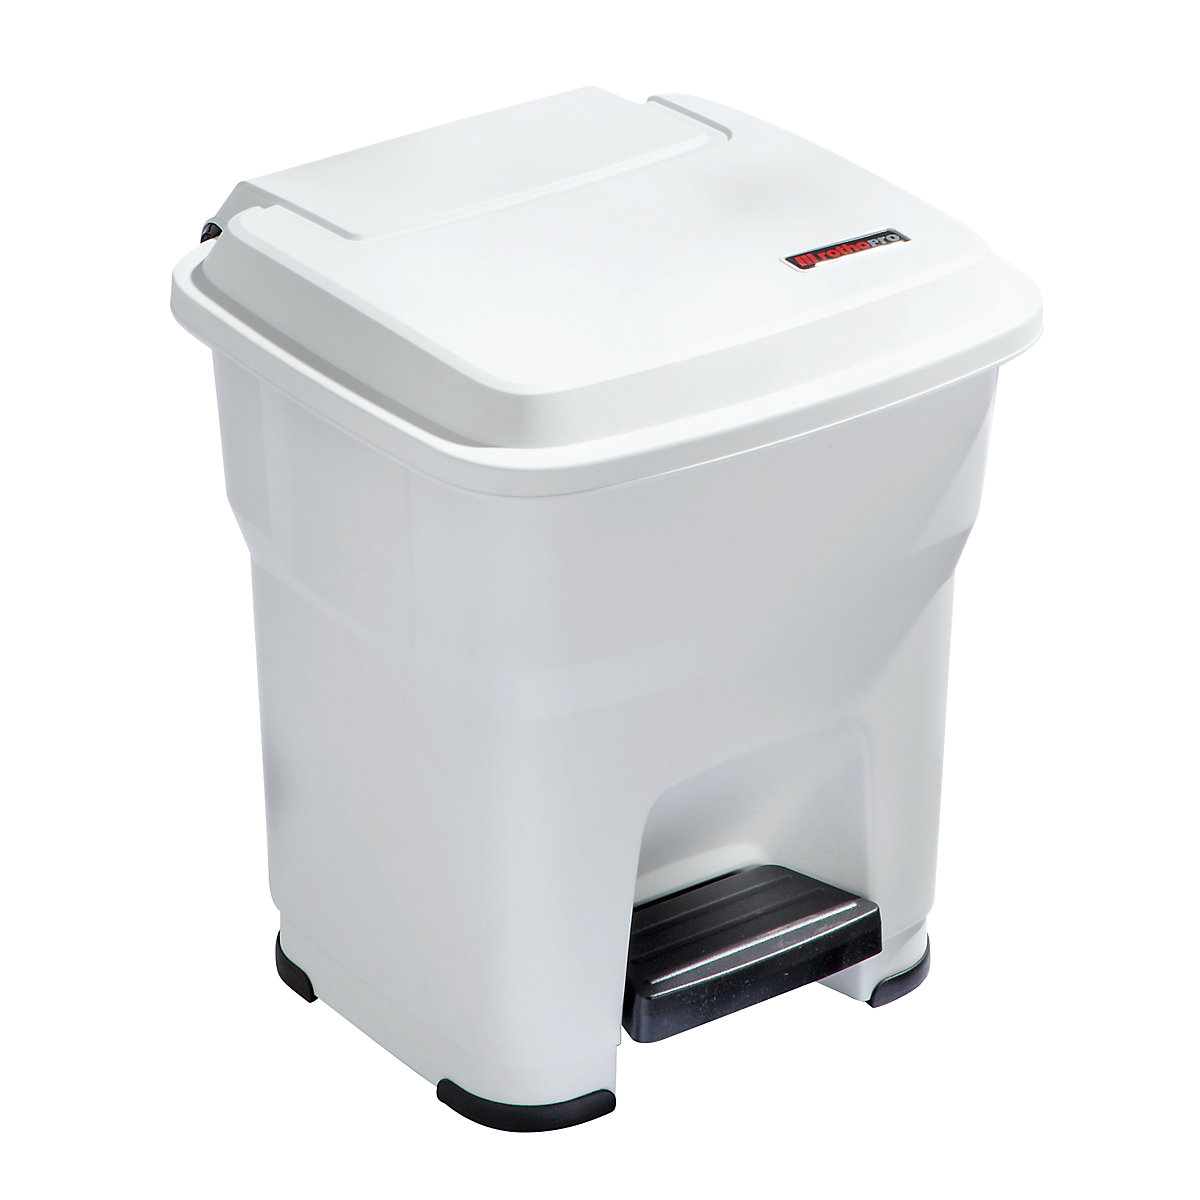 rothopro – HERA waste collector with pedal, capacity 35 l, WxHxD 390 x 440 x 390 mm, white